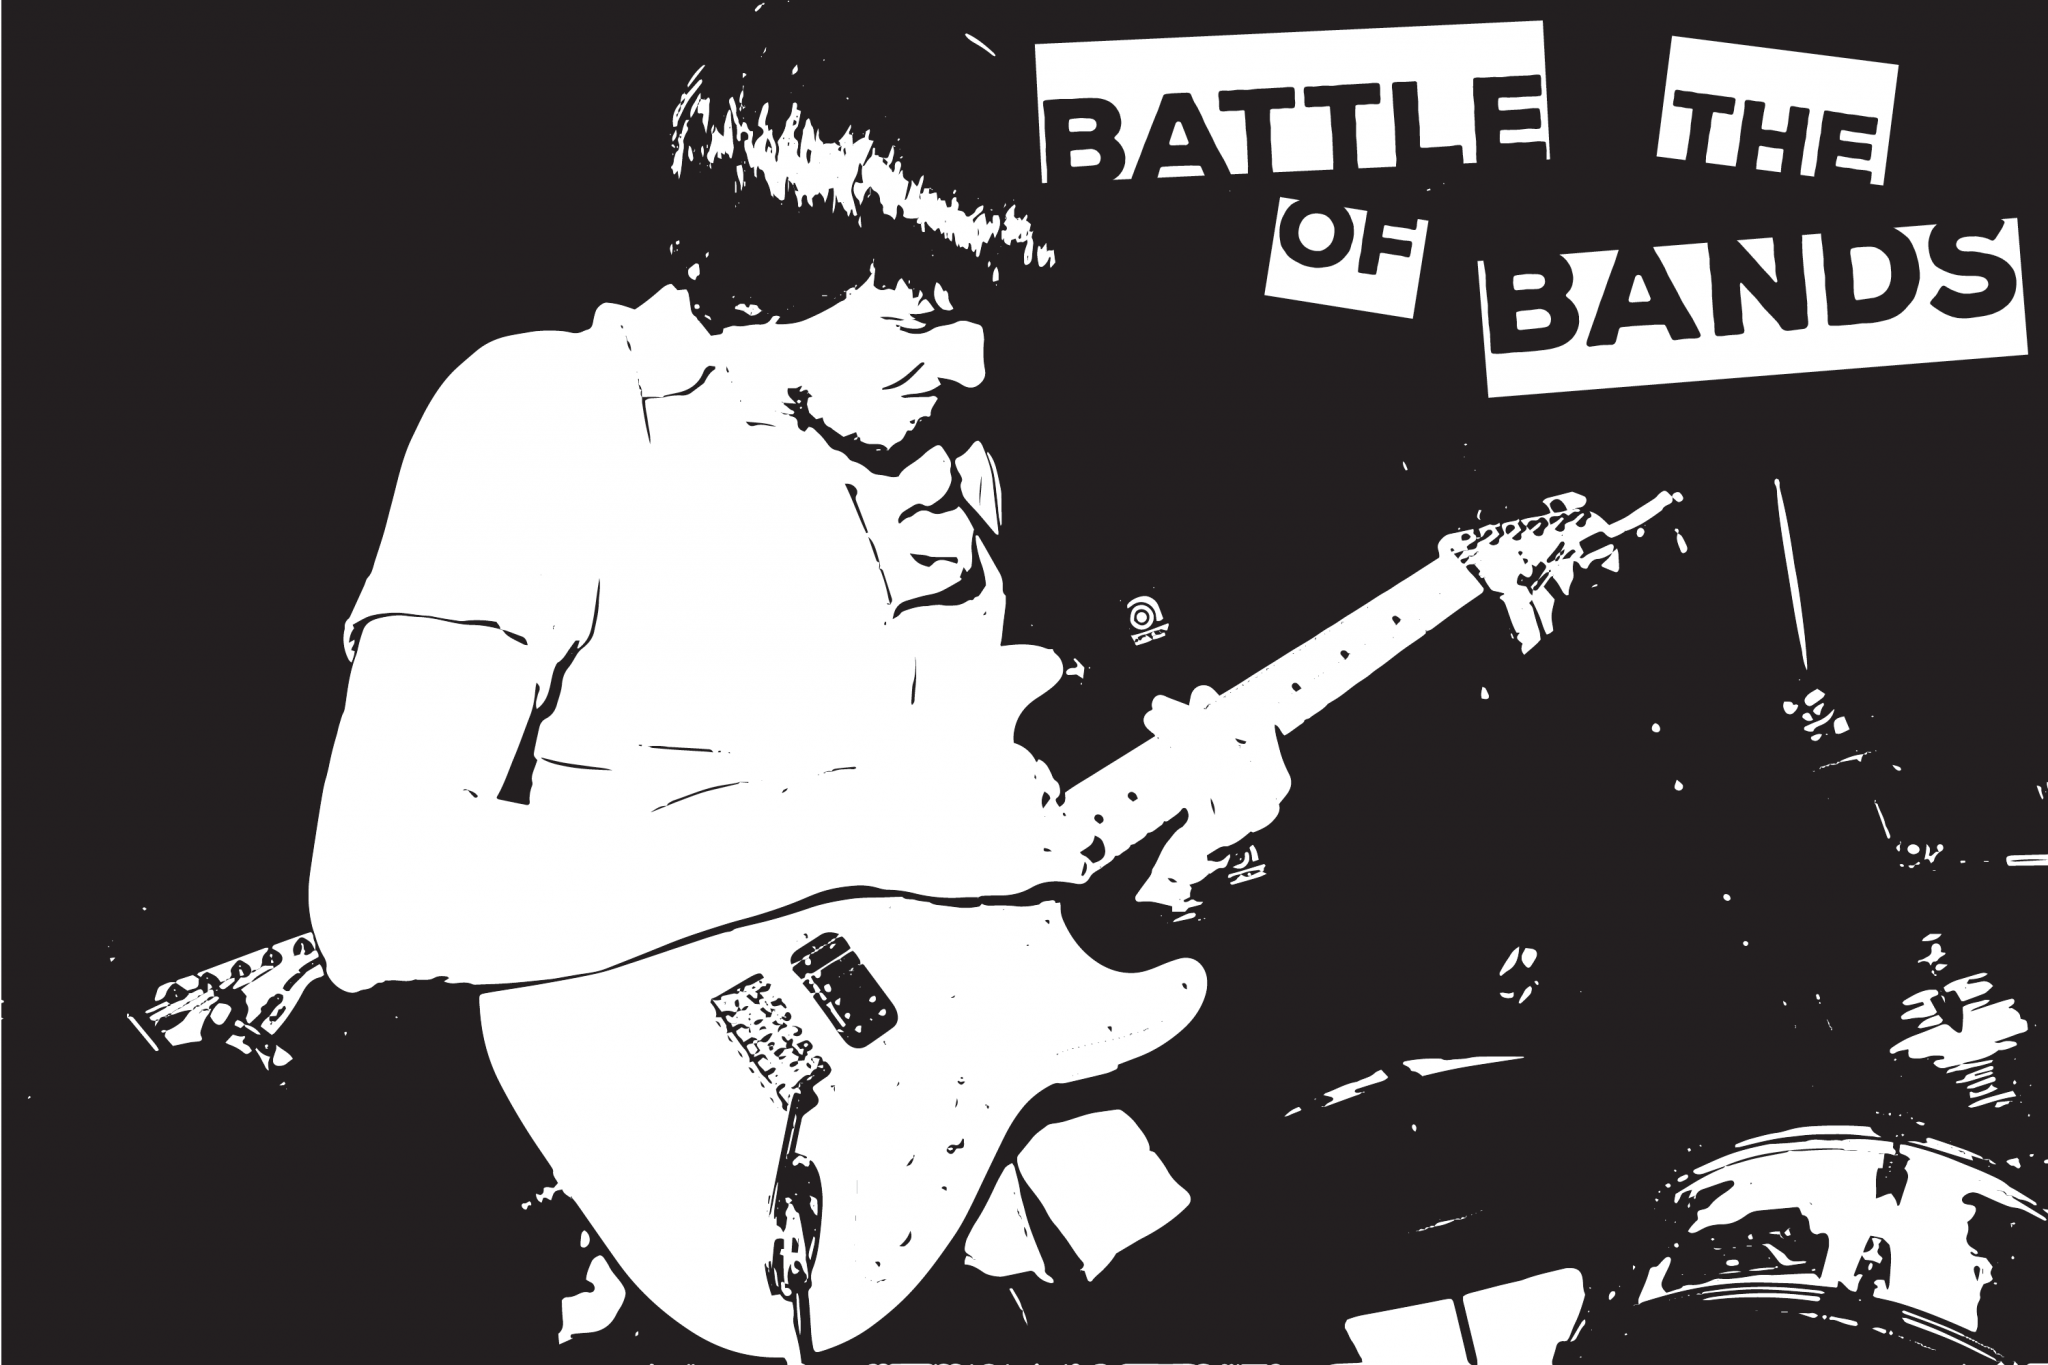 Battle of the Bands: Meet the bands